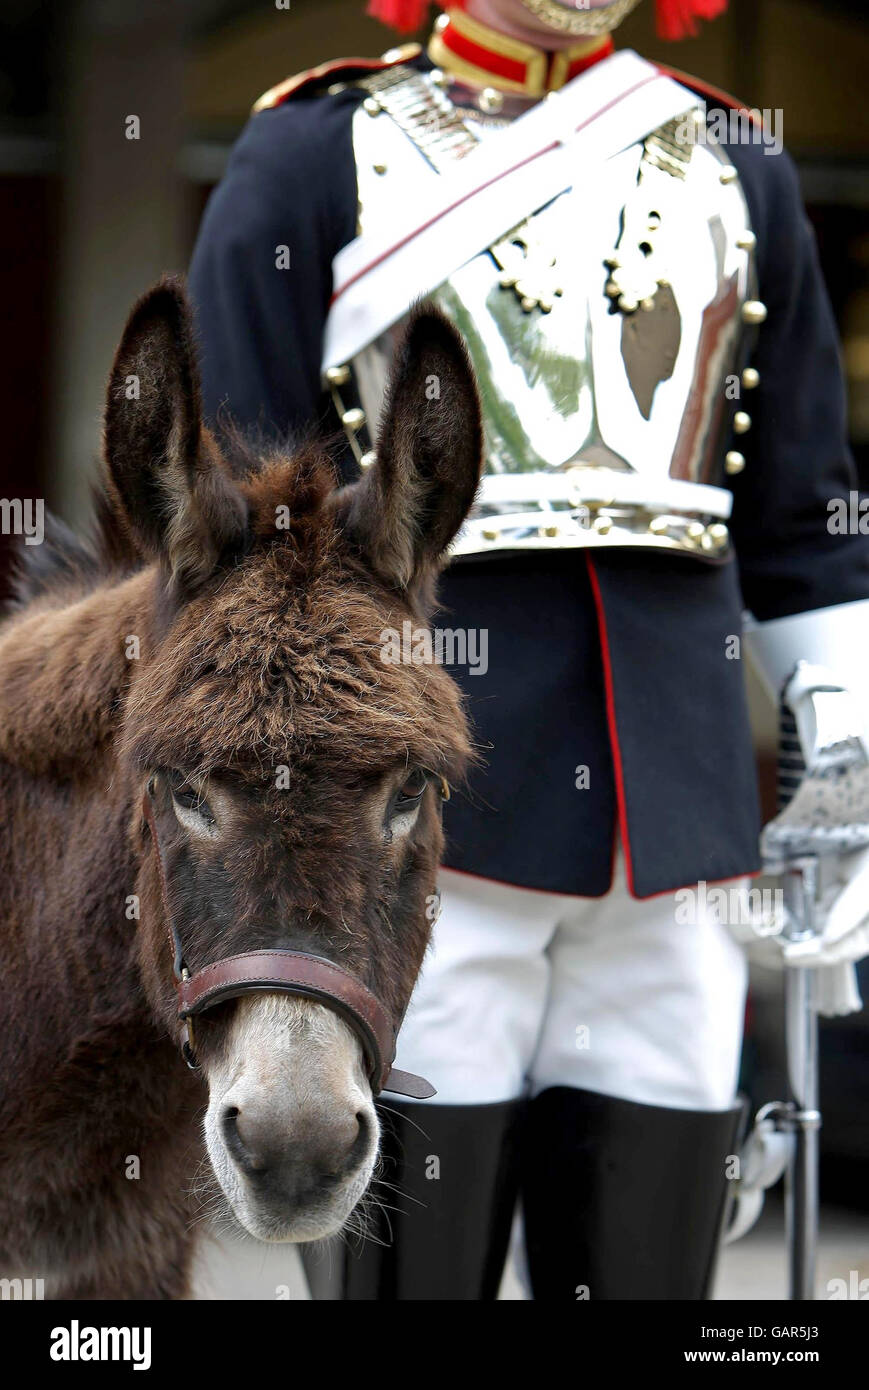 Emma, a 22-year-old donkey adopted by the Society for the Protection of Animals Abroad (SPANA), with a member of the Royal Household Cavalry at their barracks in Knightsbridge, London. Stock Photo